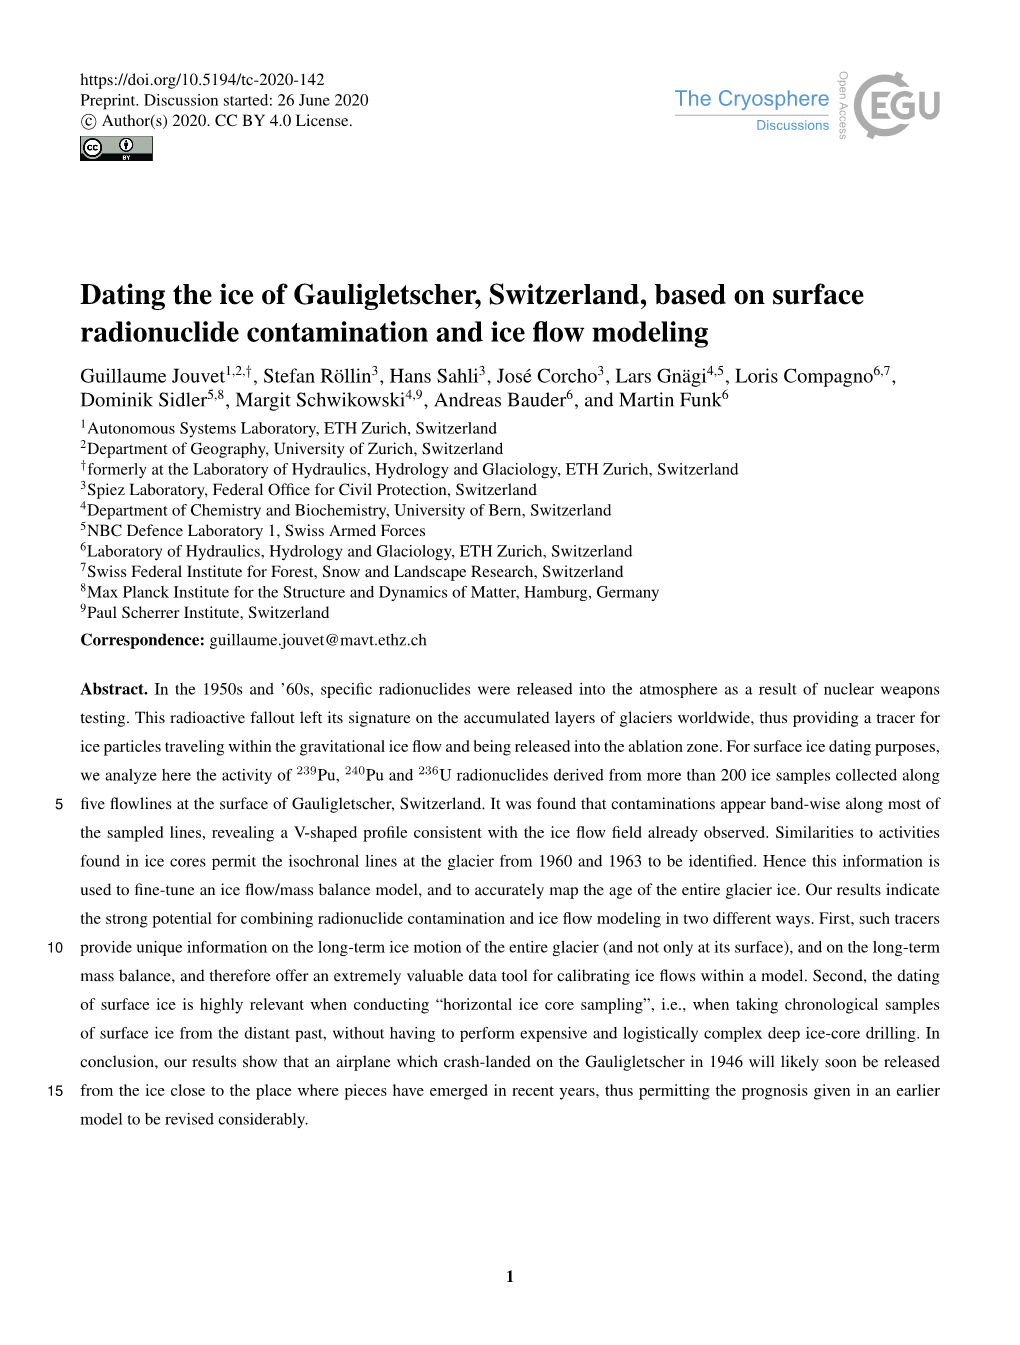 Dating the Ice of Gauligletscher, Switzerland, Based on Surface Radionuclide Contamination and Ice ﬂow Modeling